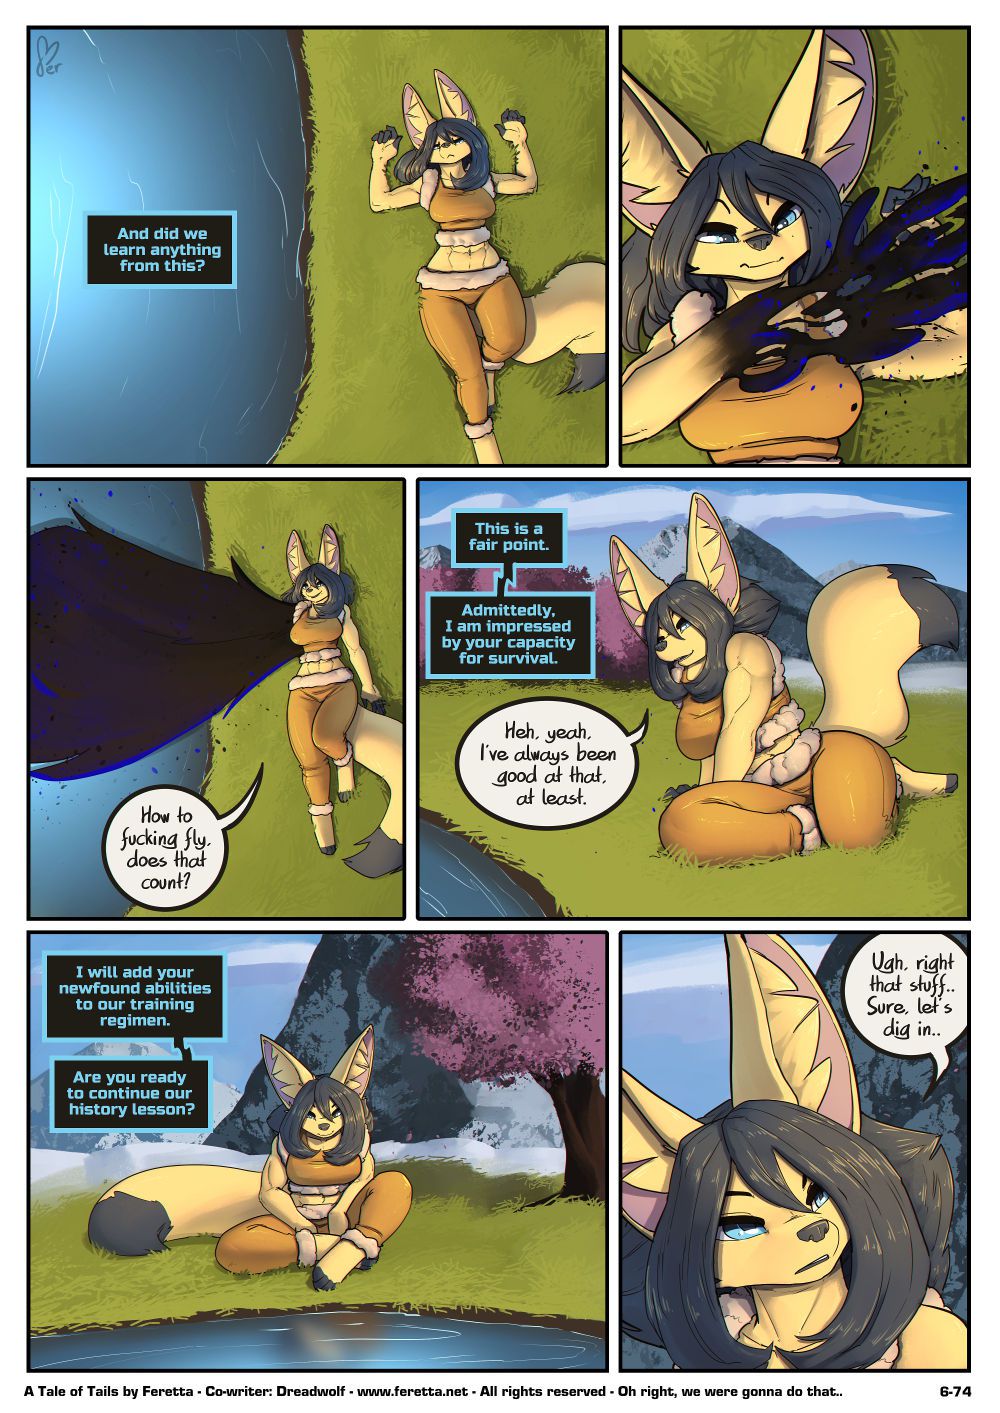 [Feretta] A Tale of Tails: Chapter 6 - Paths converge (ongoing) 76